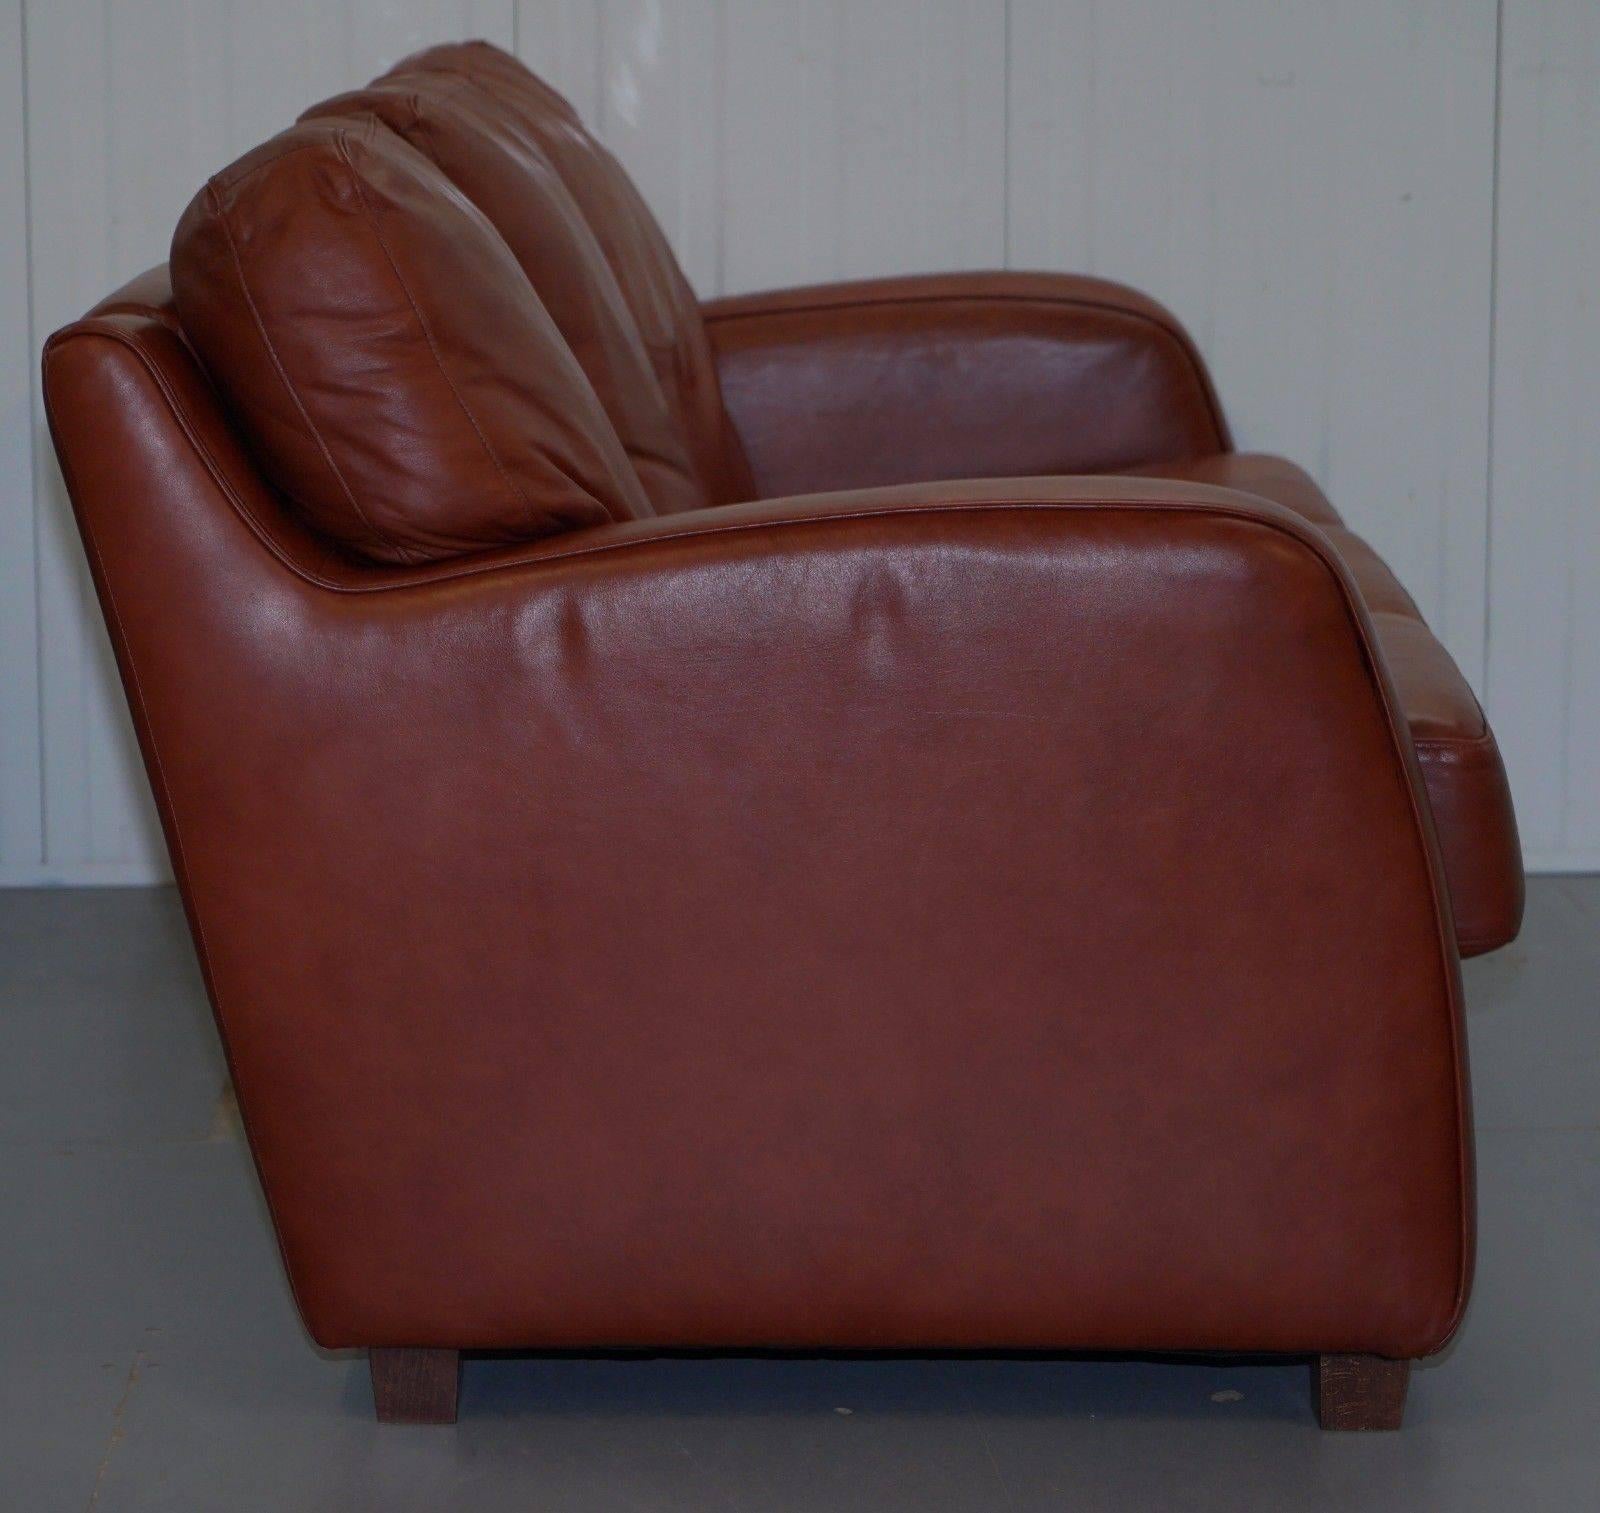 Hand-Crafted Lovely Aged Chestnut Brown Leather Three-Seat Sofa Great Color and Comfortable